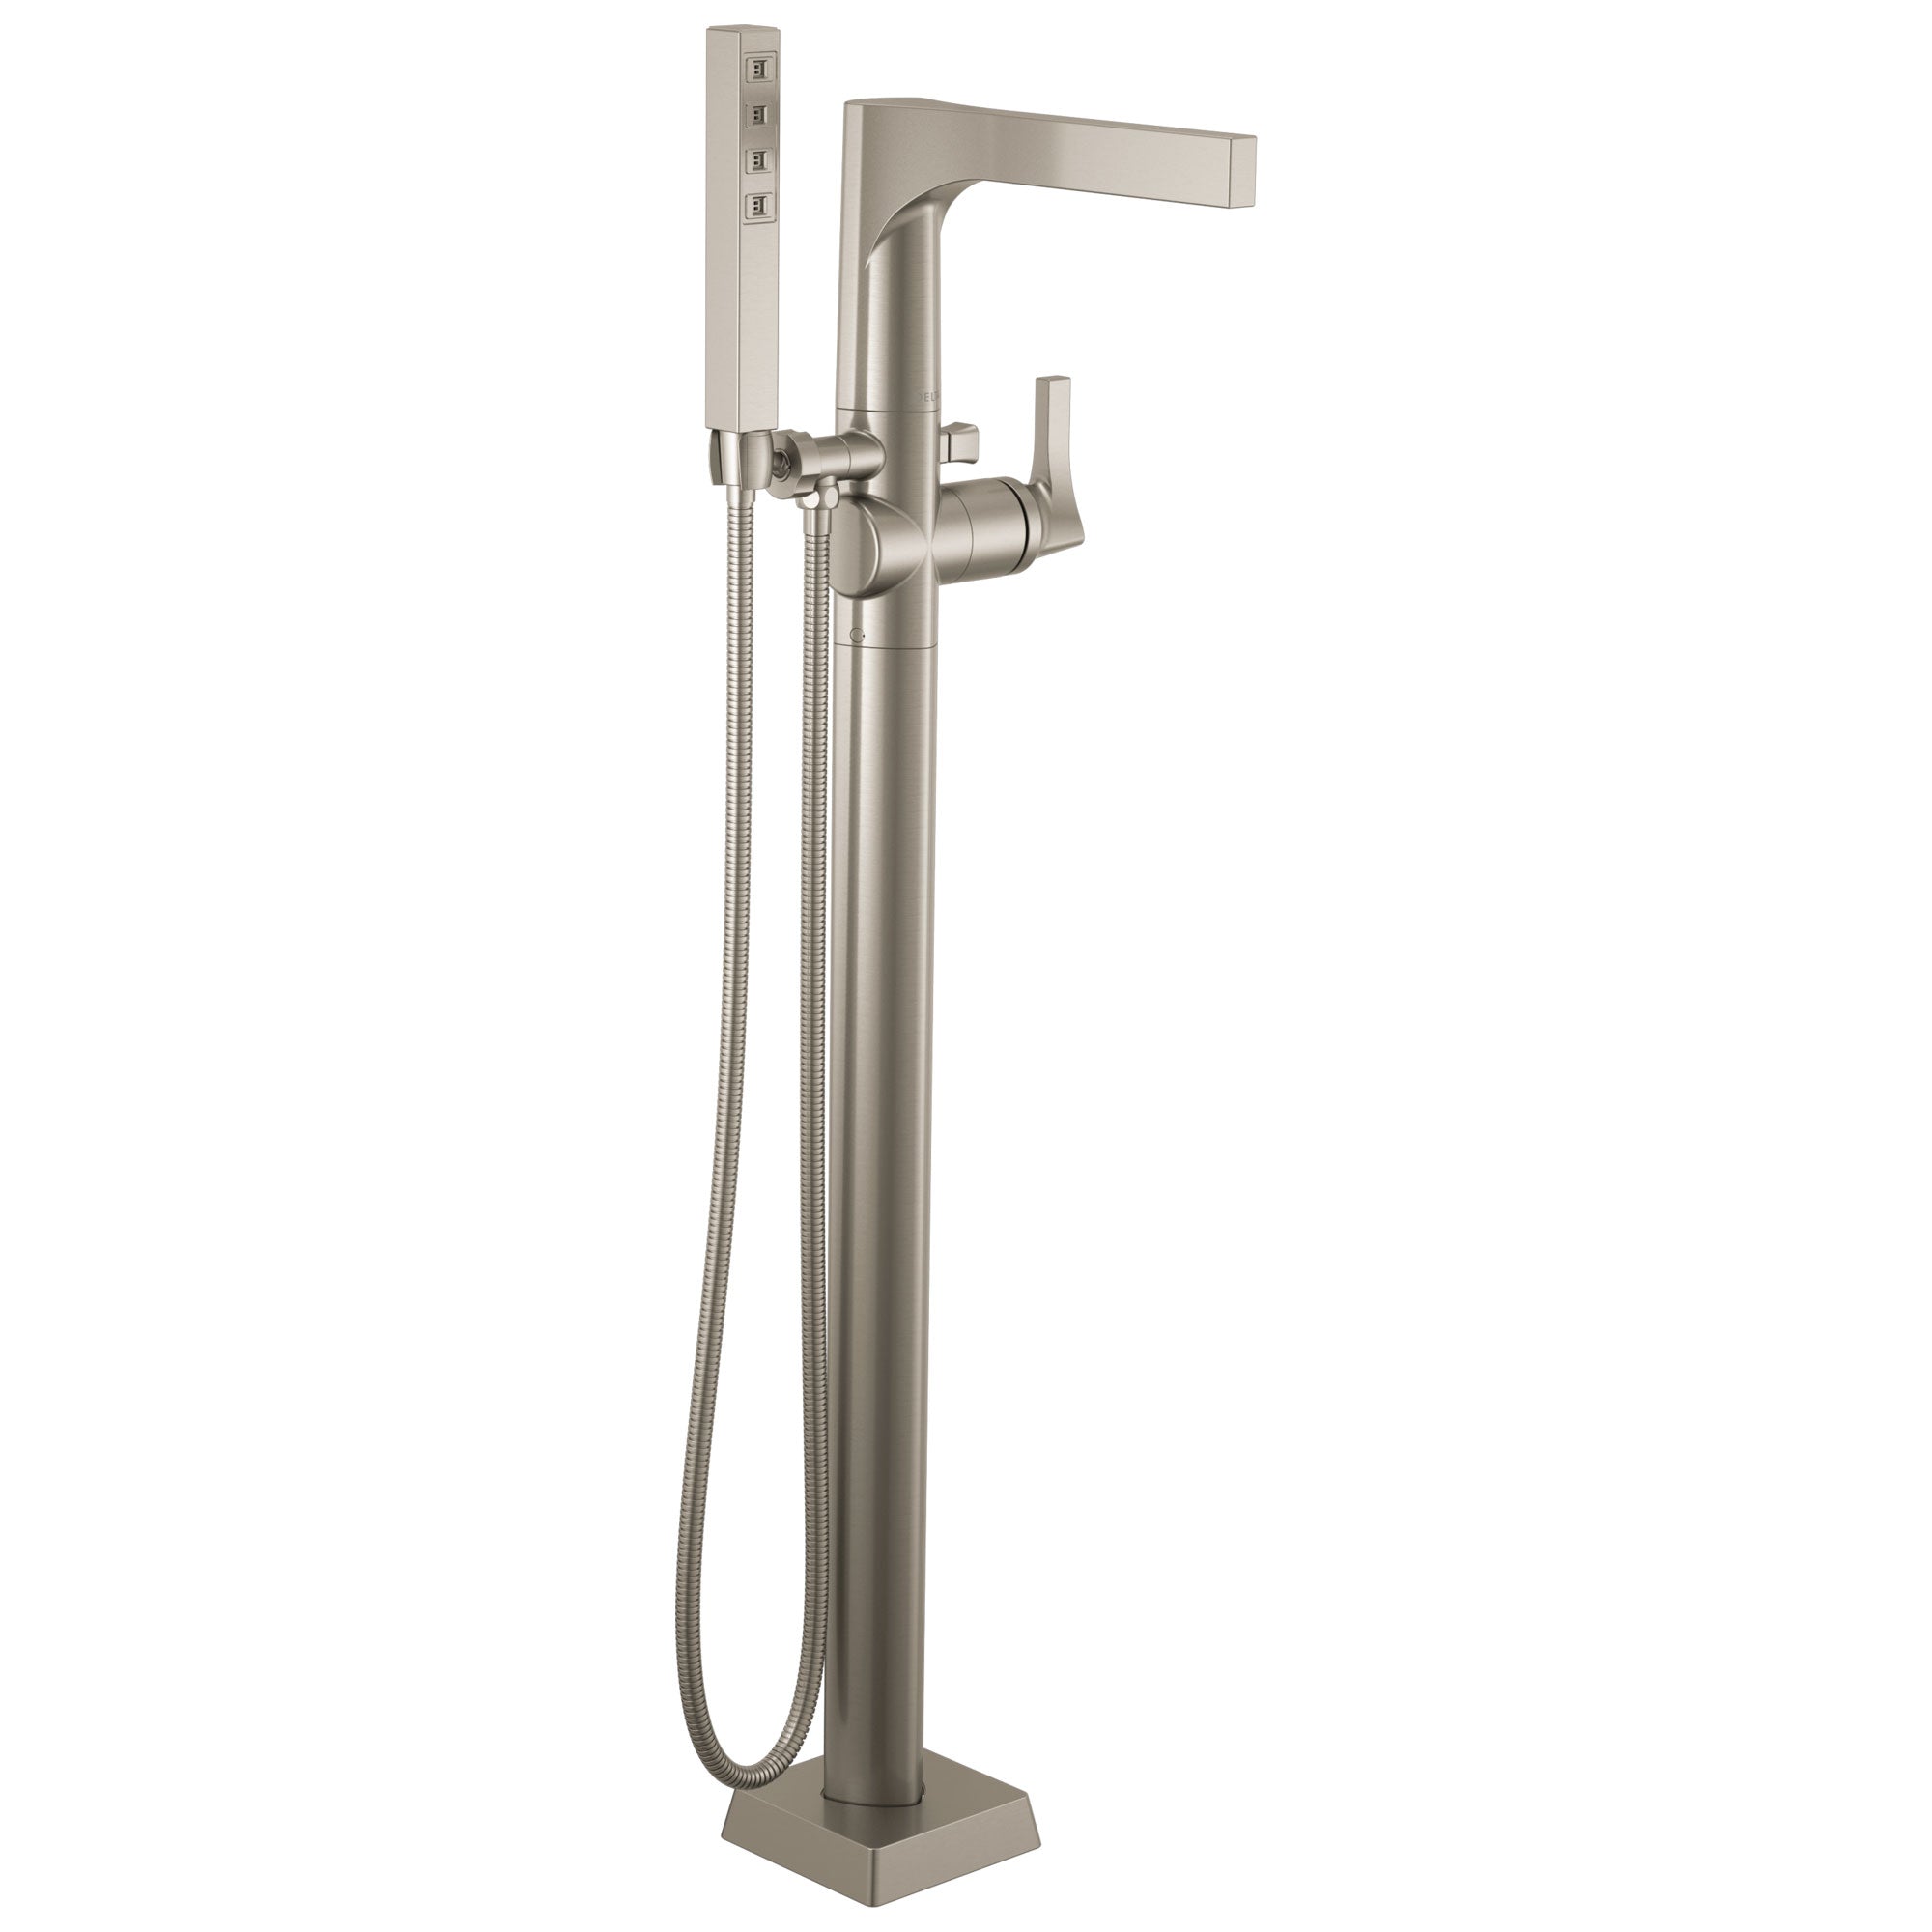 Delta Zura Collection Stainless Steel Finish Modern Floor Mount Freestanding Tub Filler Faucet with Hand Shower Includes Trim Kit and Rough-in Valve D2066V